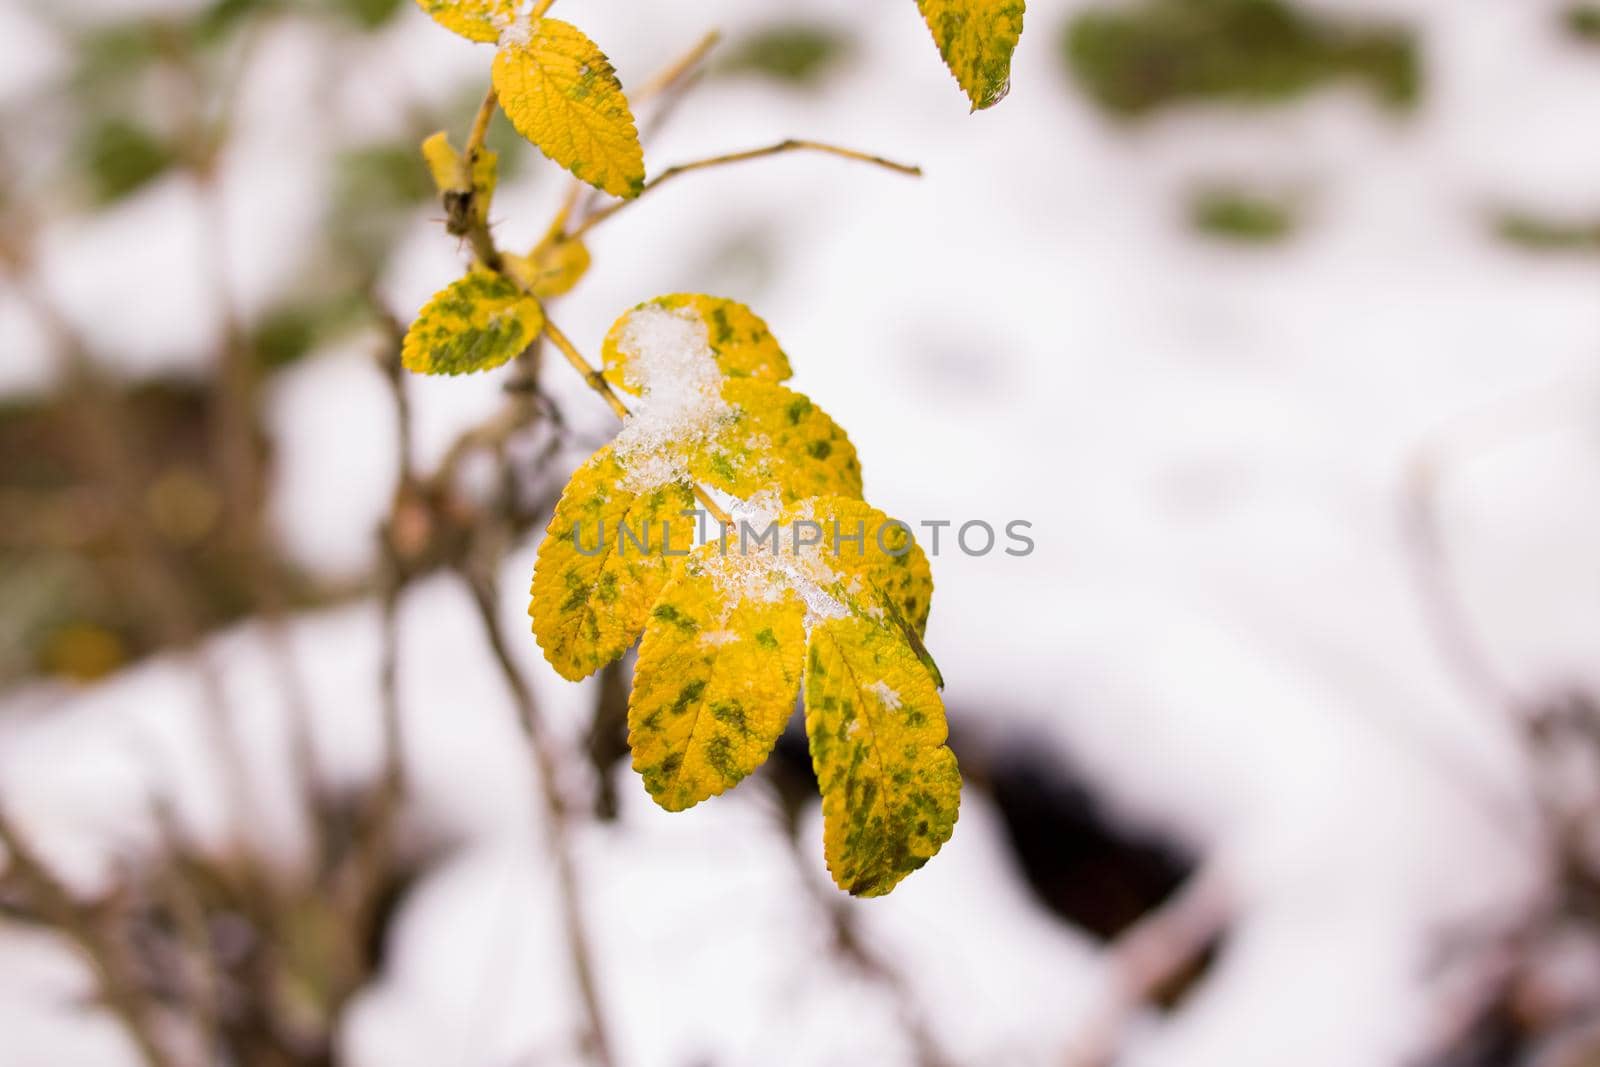 Snow on yellow plant leaves close up, macrophotography